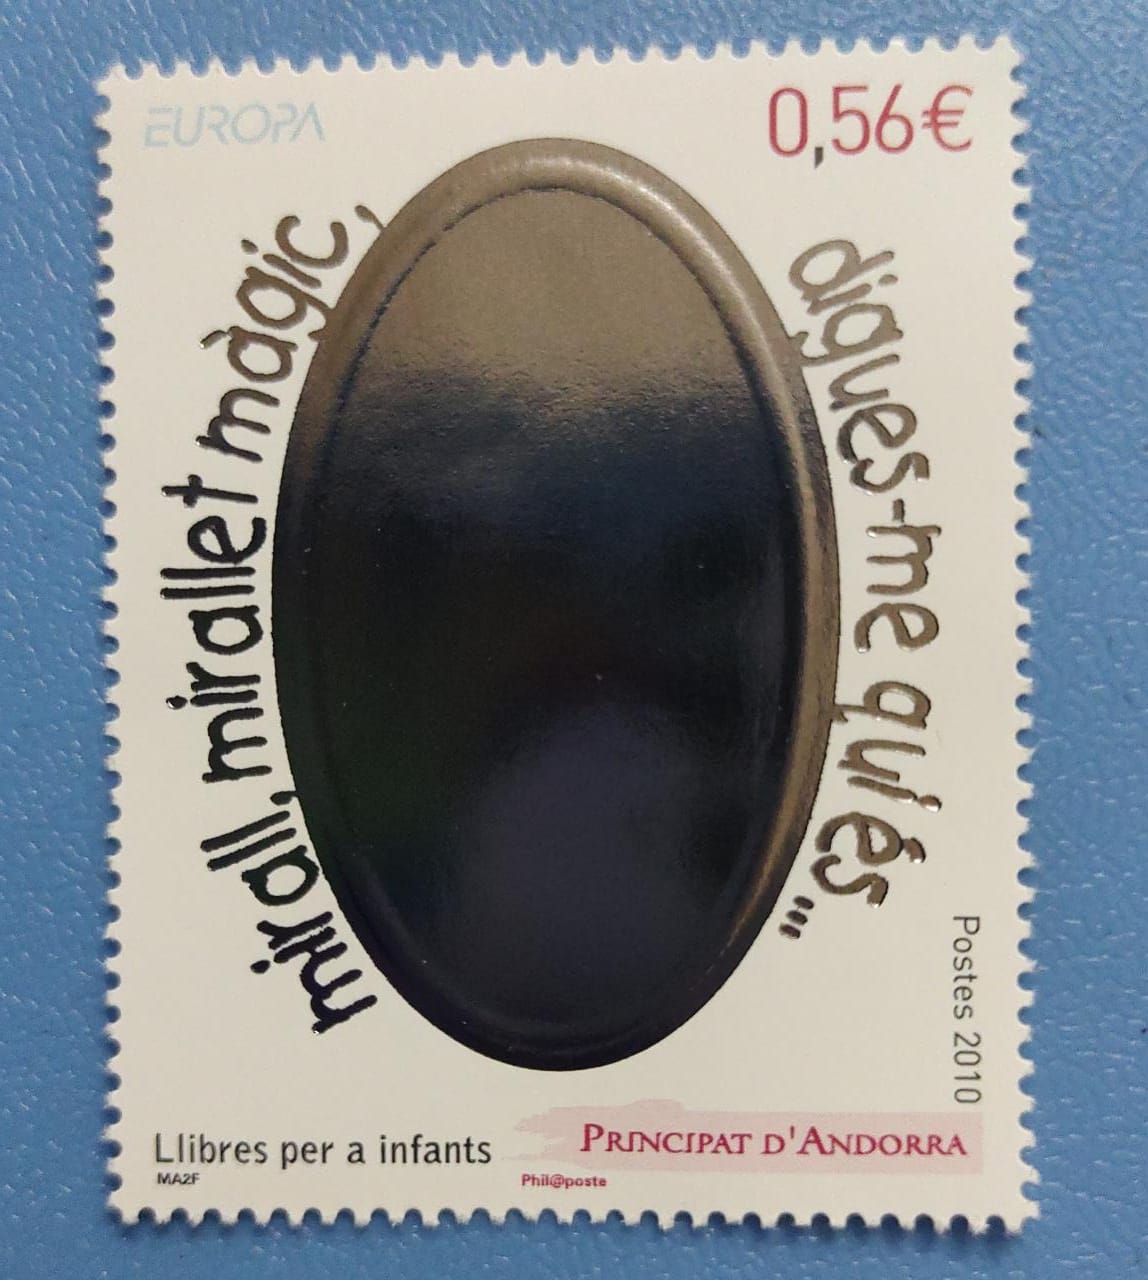 Andorra stamp with mirror finish -you can see your face in it.